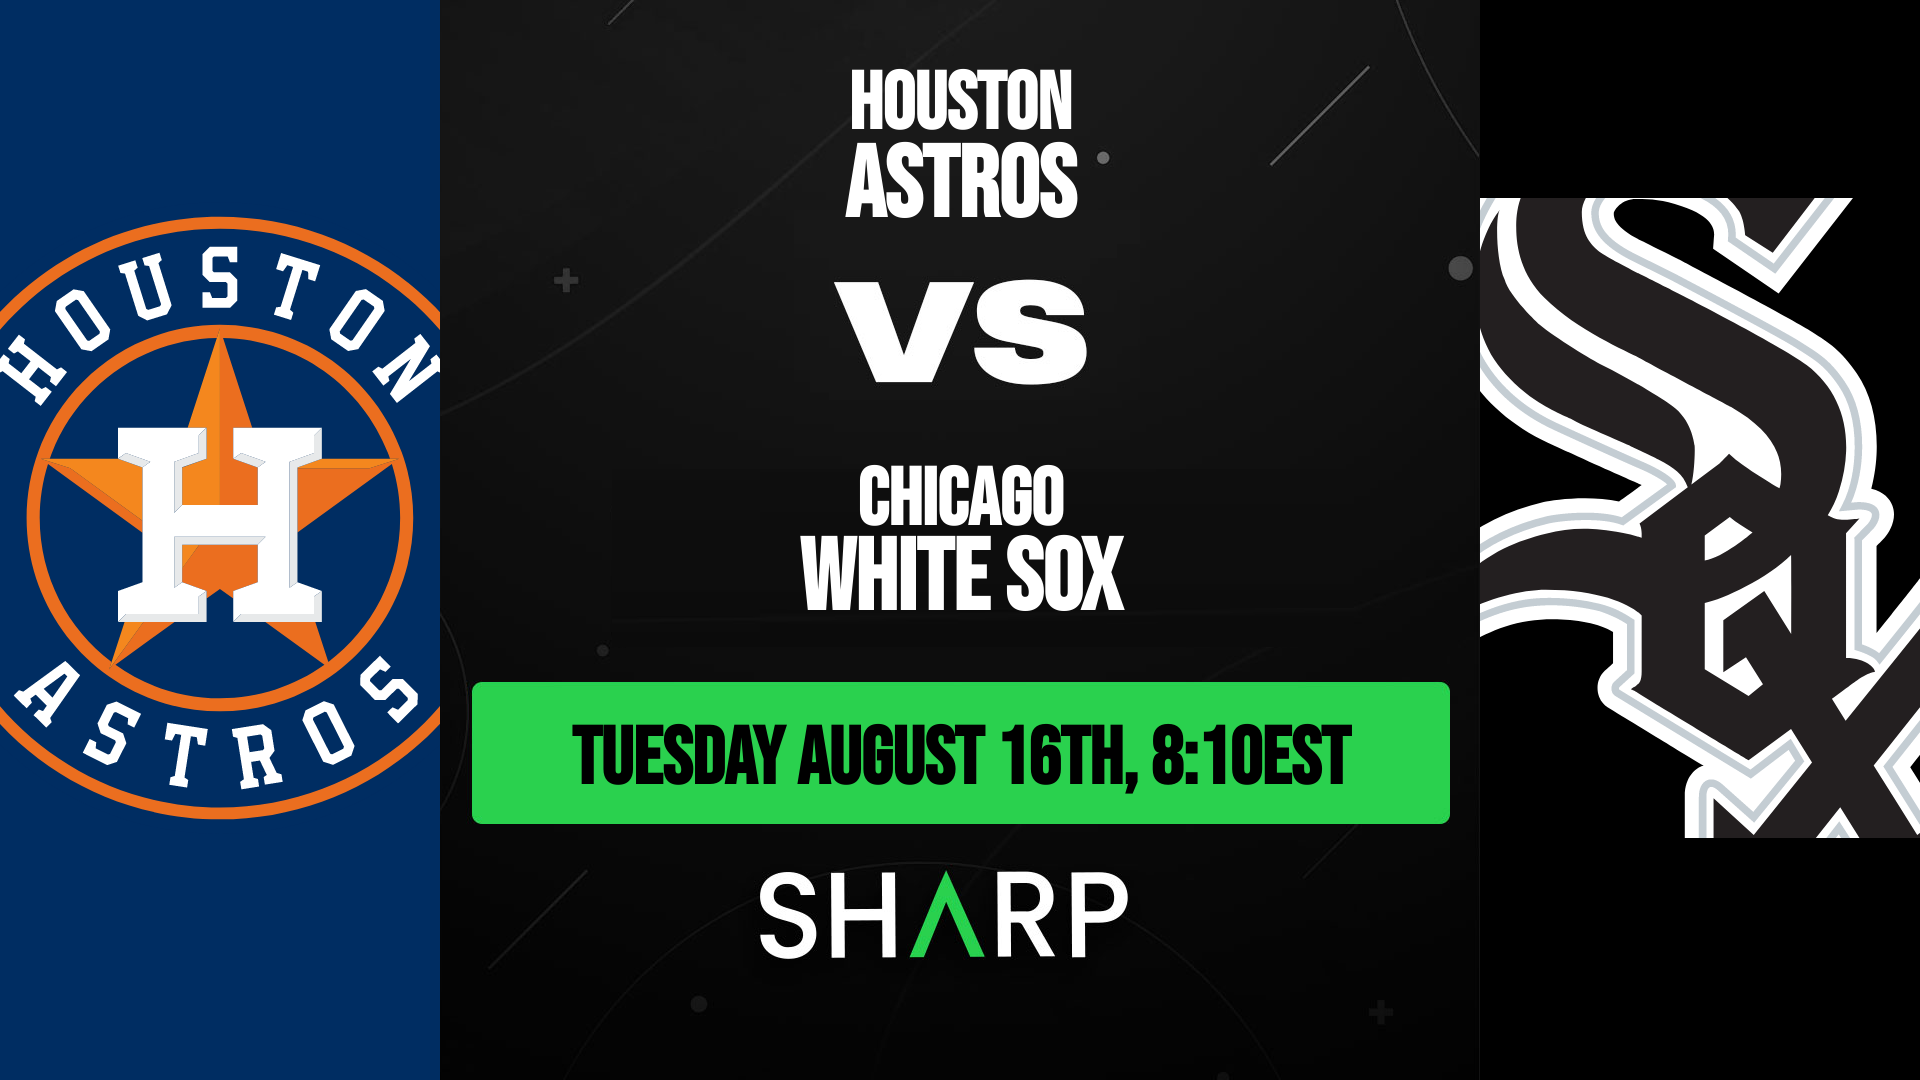 Houston Astros @ Chicago White Sox Matchup Preview - August 16th, 2022